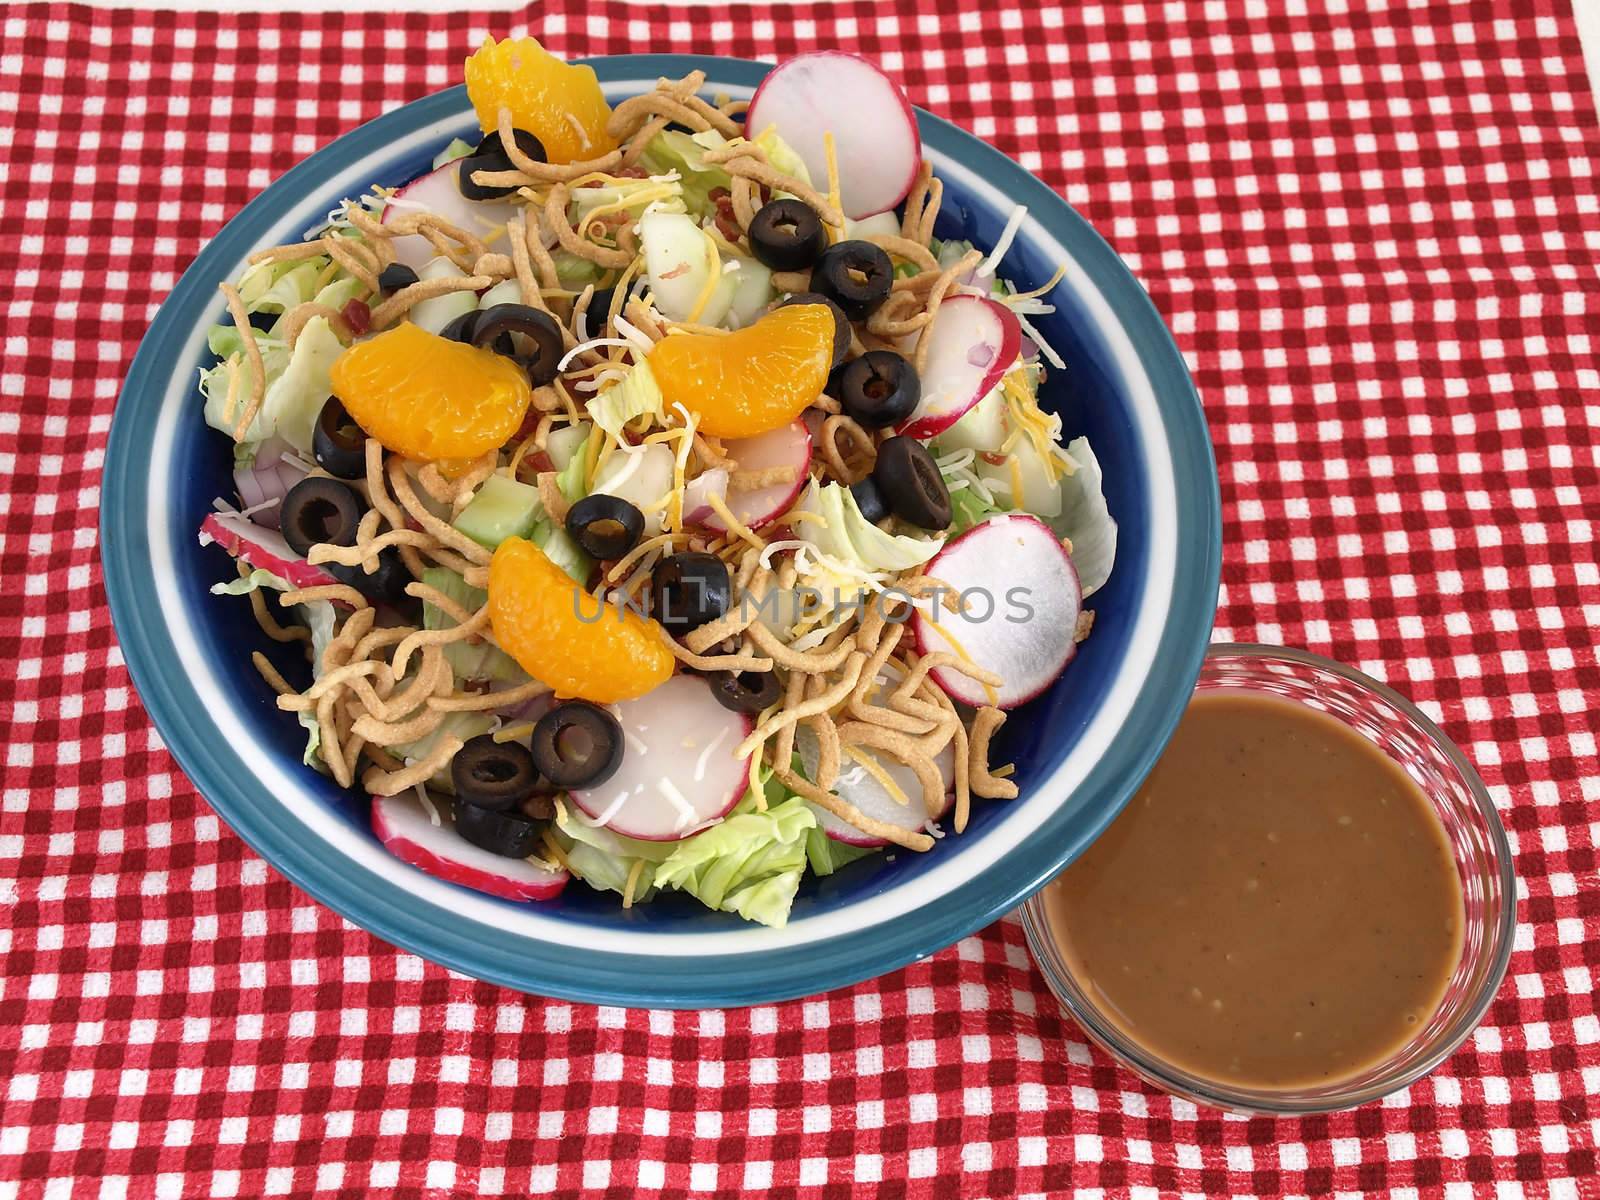 Crisp salad of lettuce, radishes, olives, mandarin oranges, cheese and Chinese noodles. Studio isolated over a red checked cloth